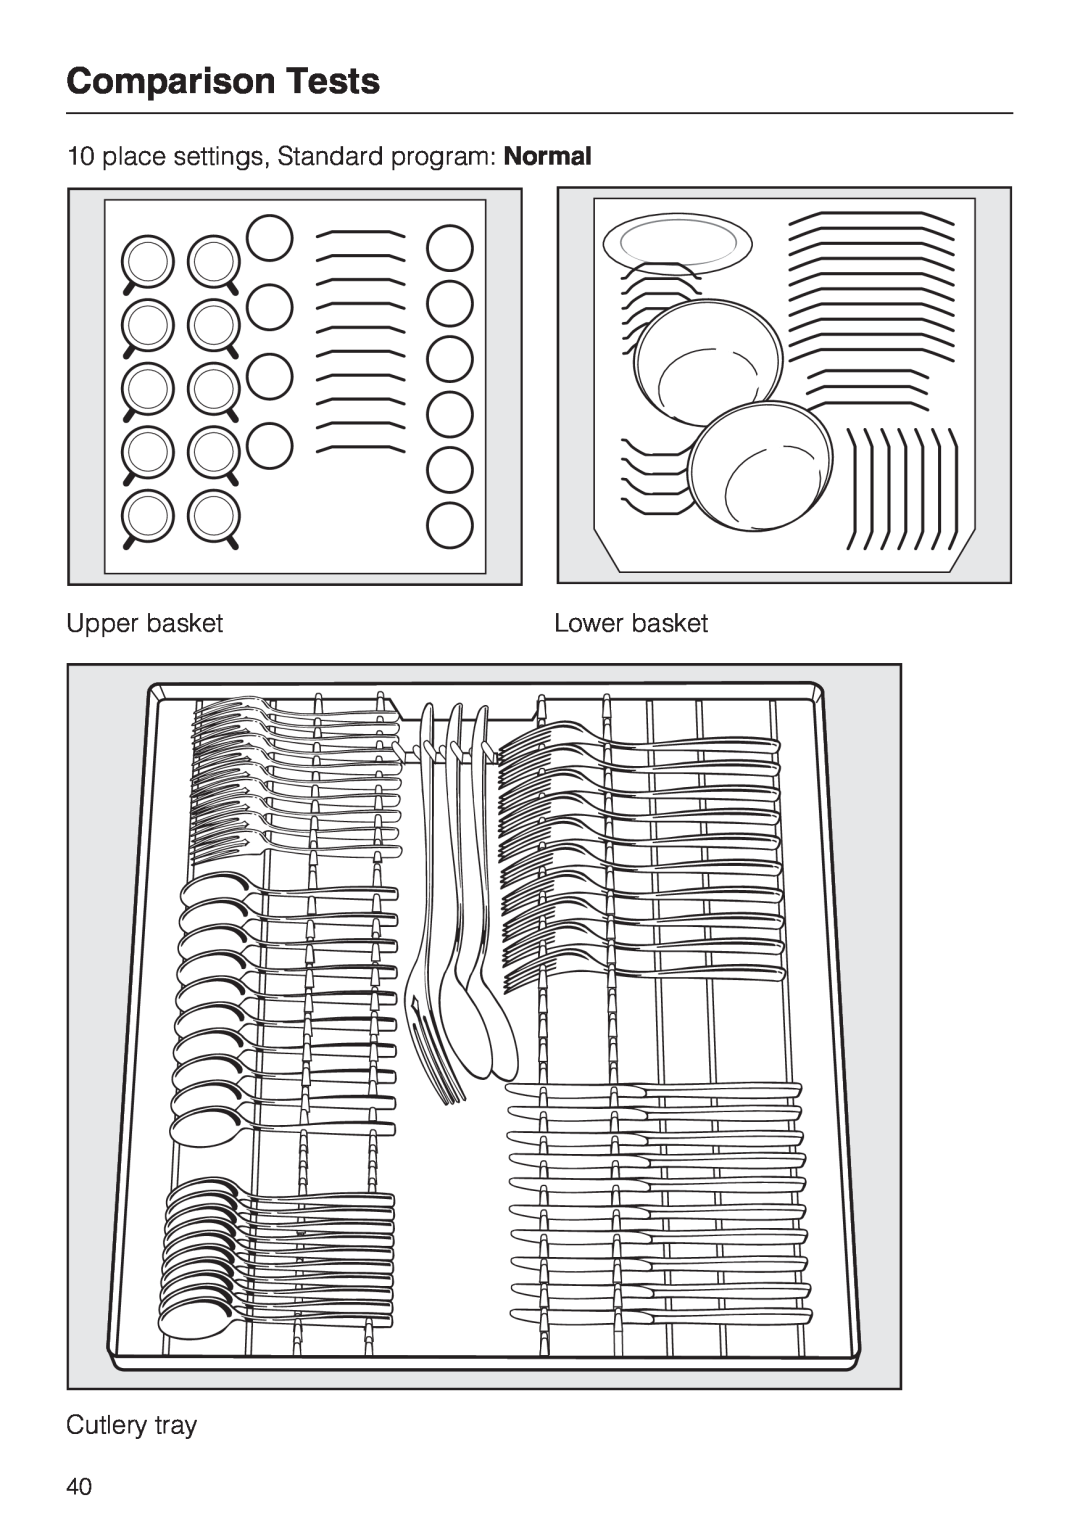 Miele G 2143 manual Comparison Tests, place settings, Standard program: Normal, Upper basket, Lower basket, Cutlery tray 